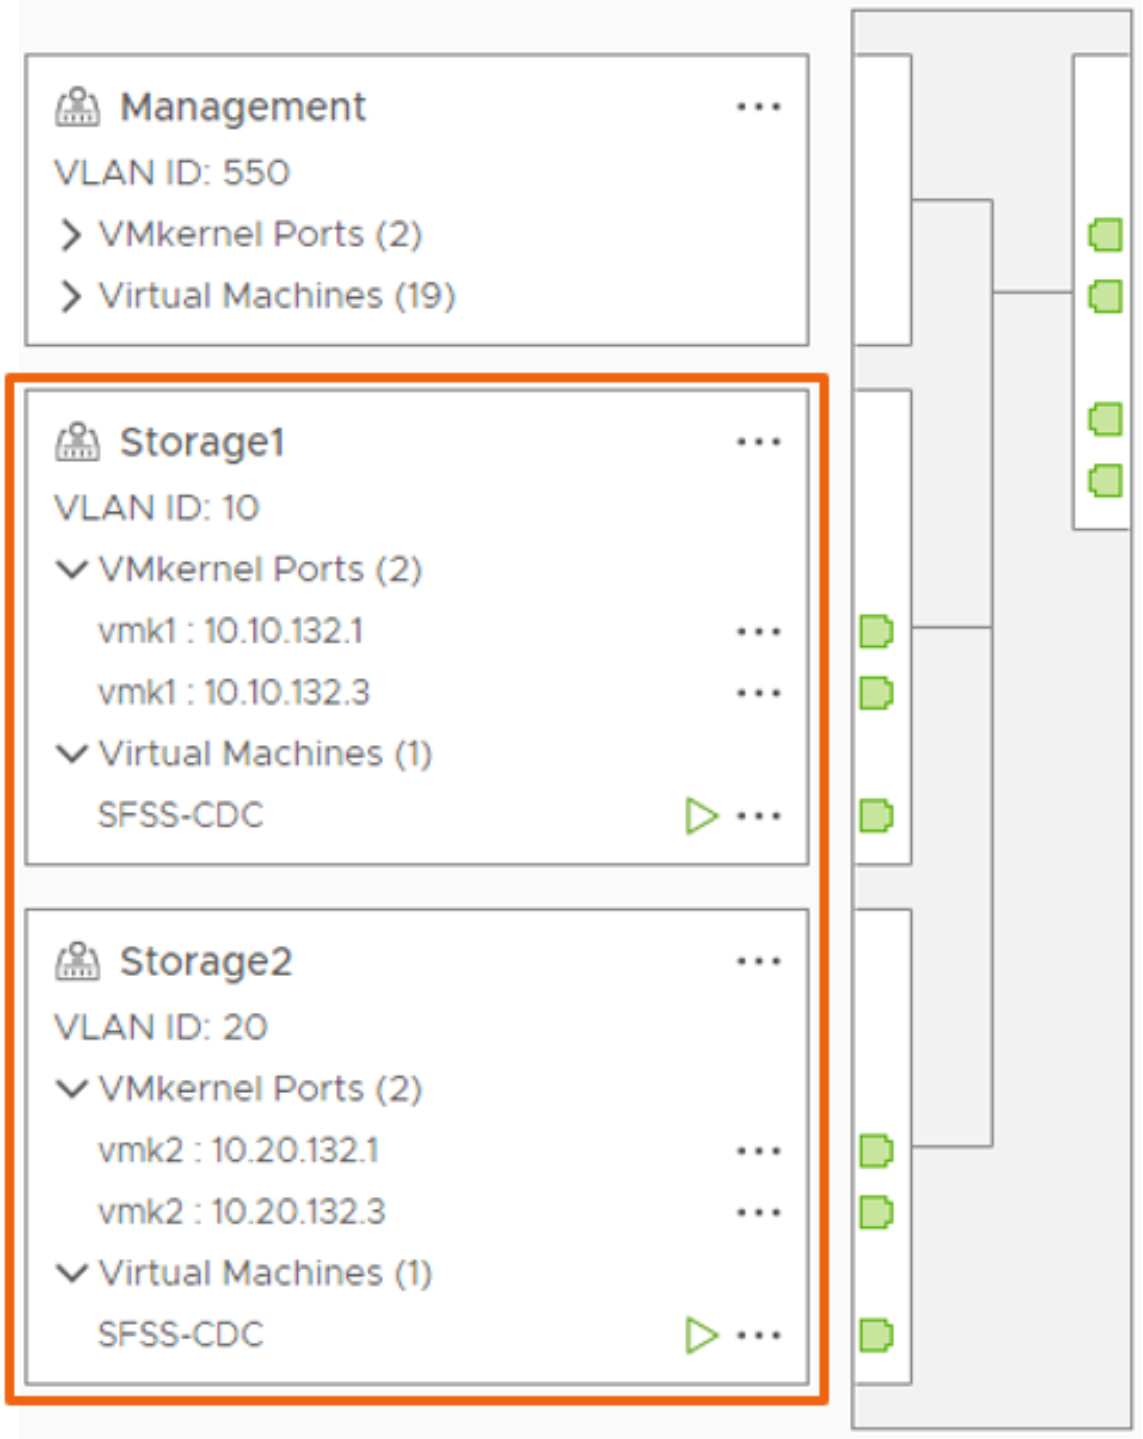 vSphere Distributed Switch topology in the vSphere Client. Two storage networks are shown.